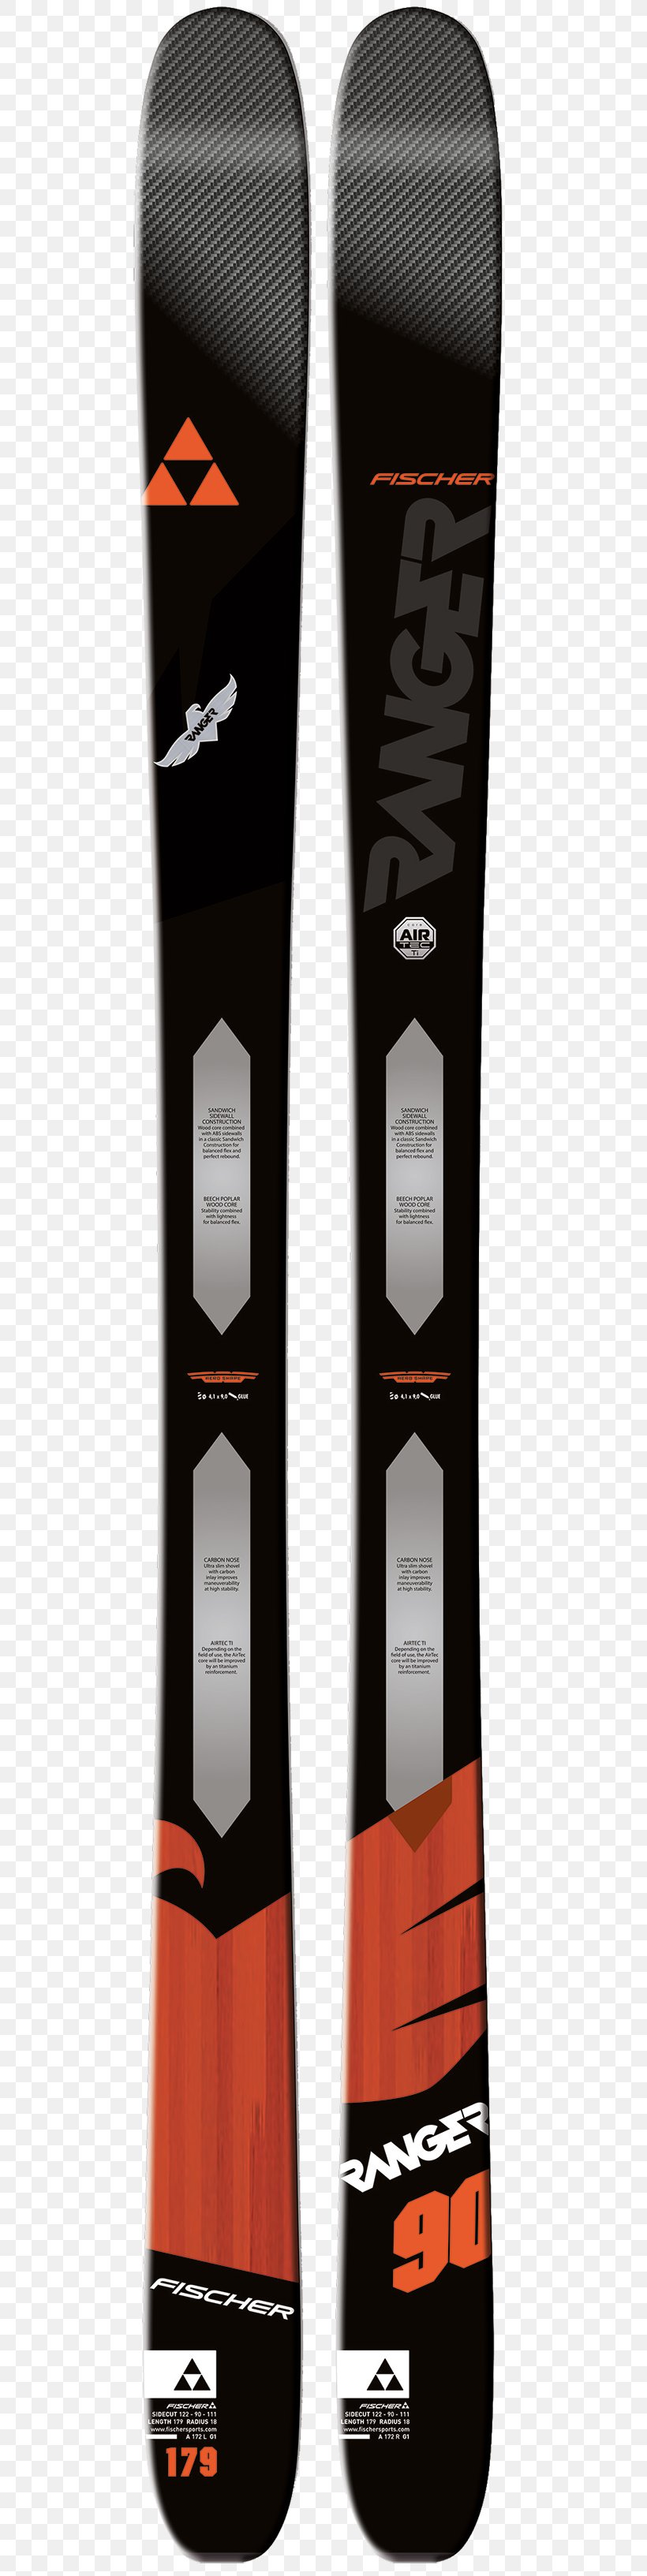 Fischer Skis Ranger 90 Ti Ski Bindings Ski Geometry, PNG, 500x3266px, Fischer, Backcountry Skiing, Freeriding, Freeskiing, Nordica Download Free